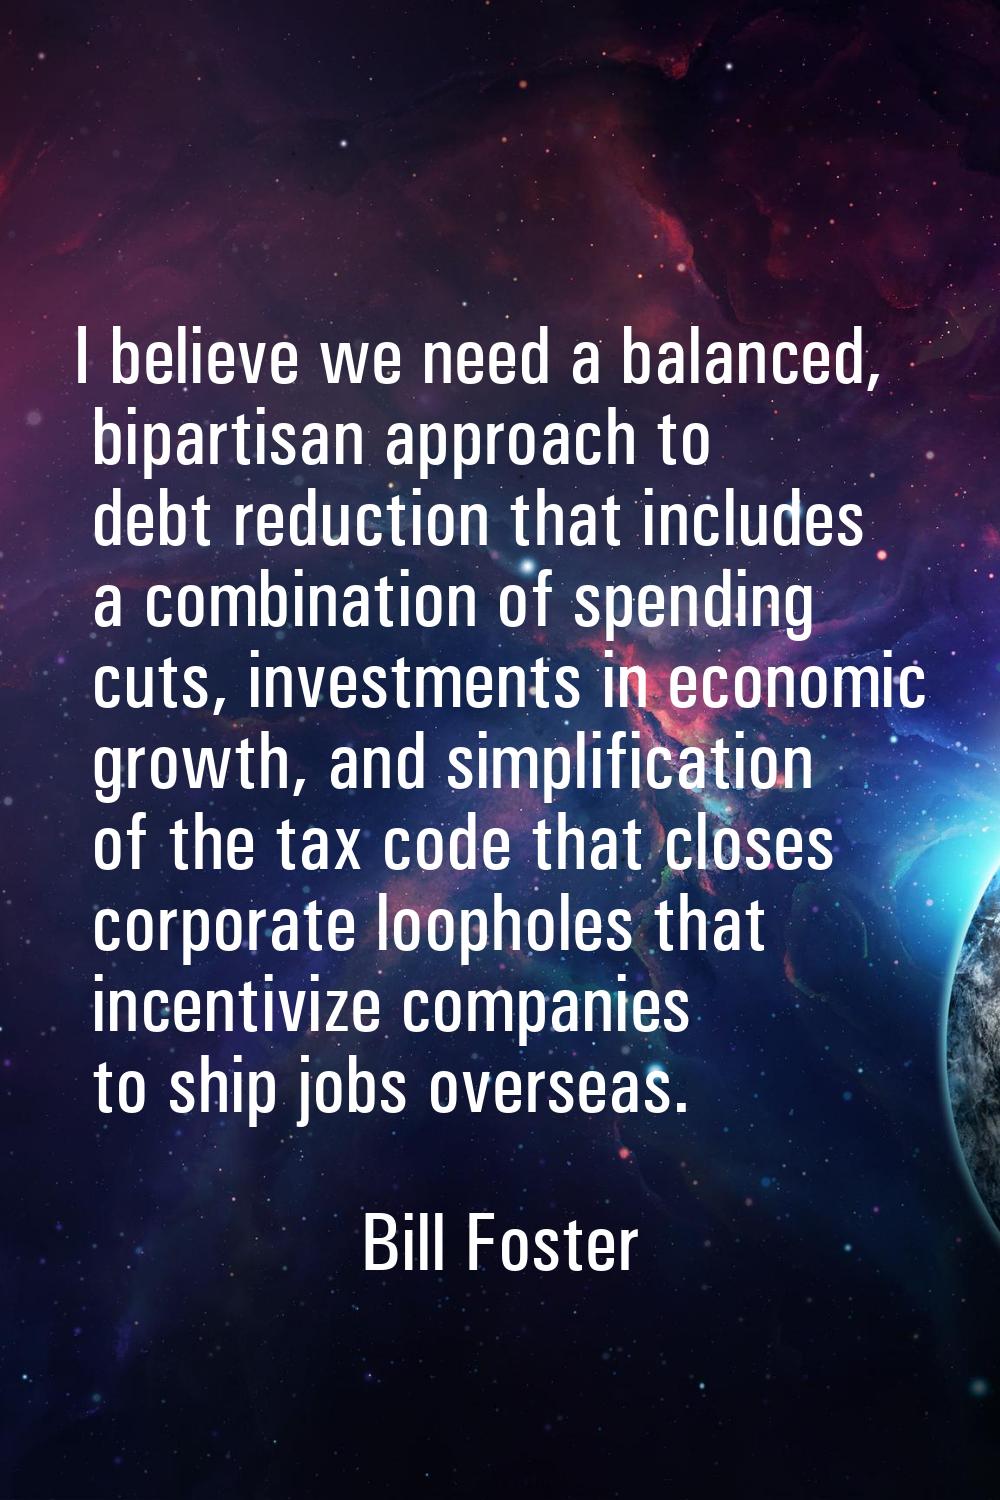 I believe we need a balanced, bipartisan approach to debt reduction that includes a combination of 